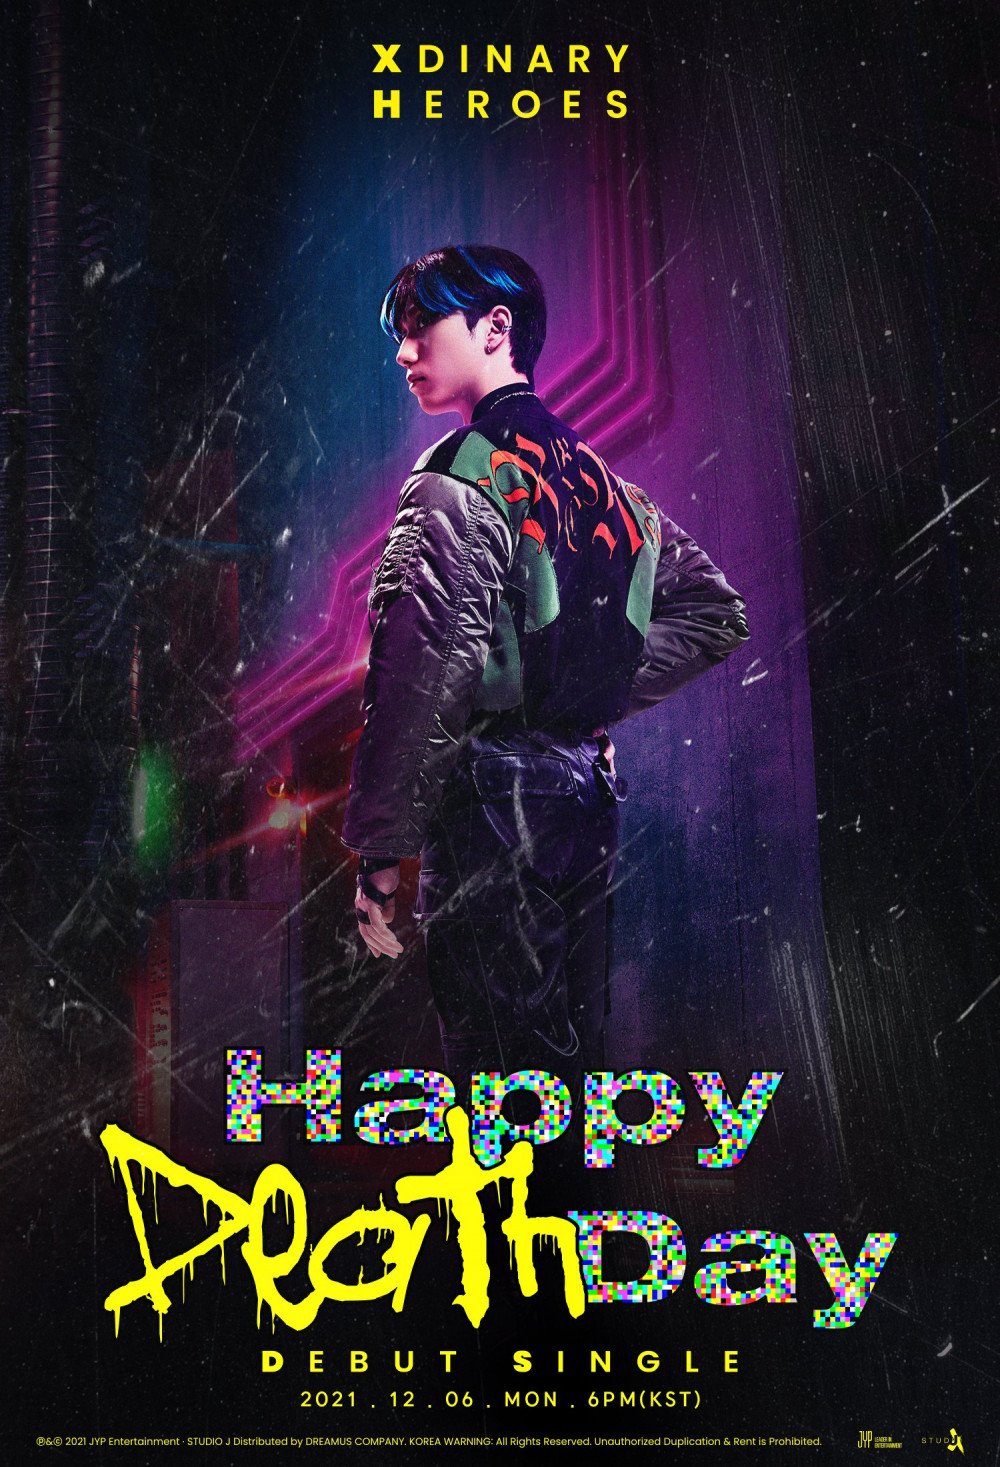 Xdinary Heroes' Gunil shows a dark edgy style in 'Happy Death Day' concept photo